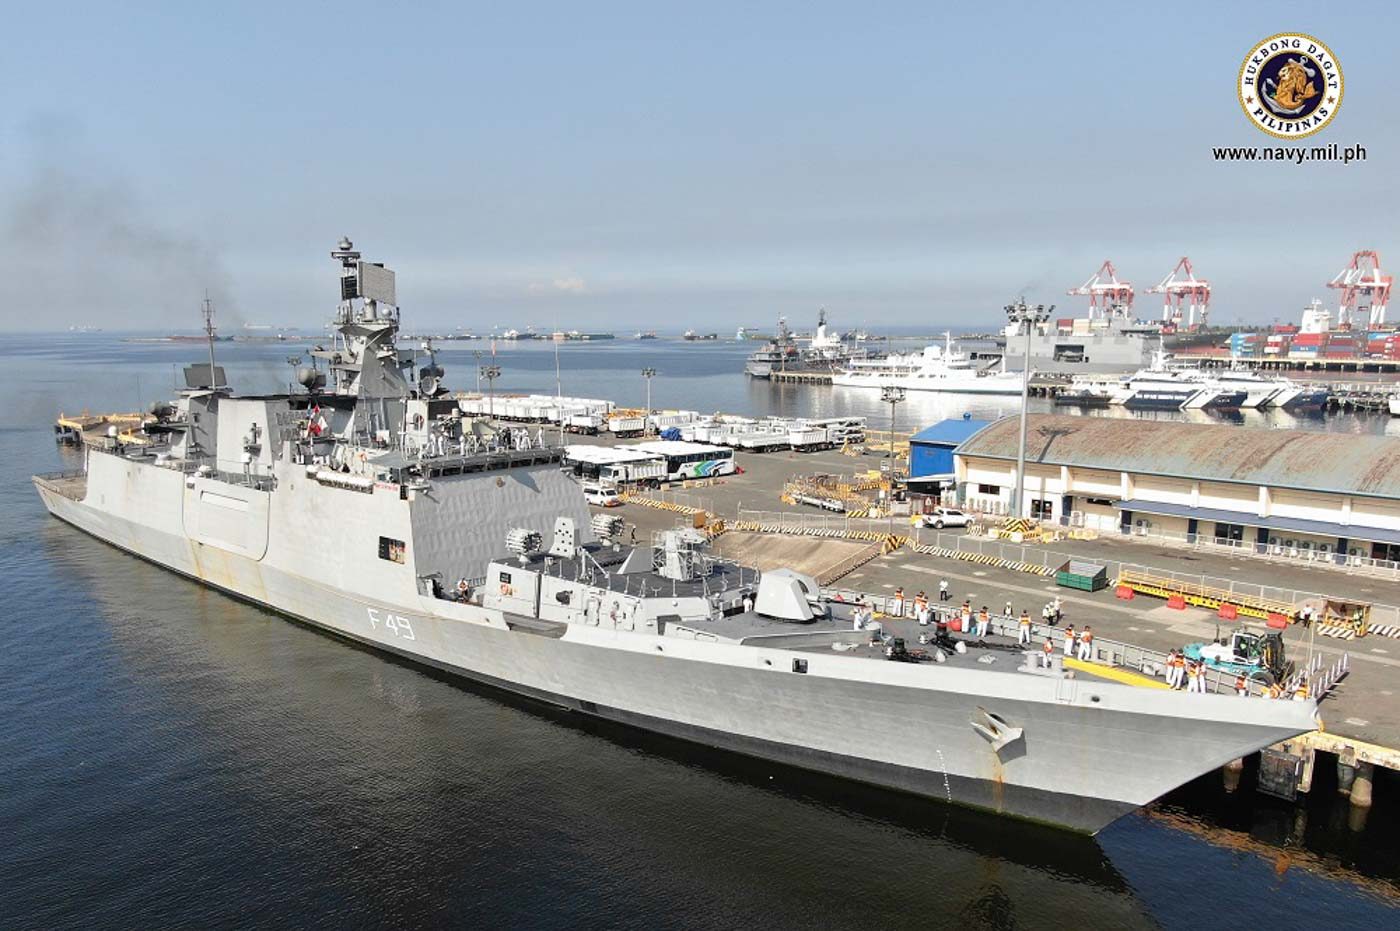 INDIAN FRIGATE. The Shivalik-class guided missile frigate INS Sahyadri is one of India's more advanced warships. Here it is docked at the Port of Manila on Wednesday, October 23, 2019. Photo from the Philippine Navy 